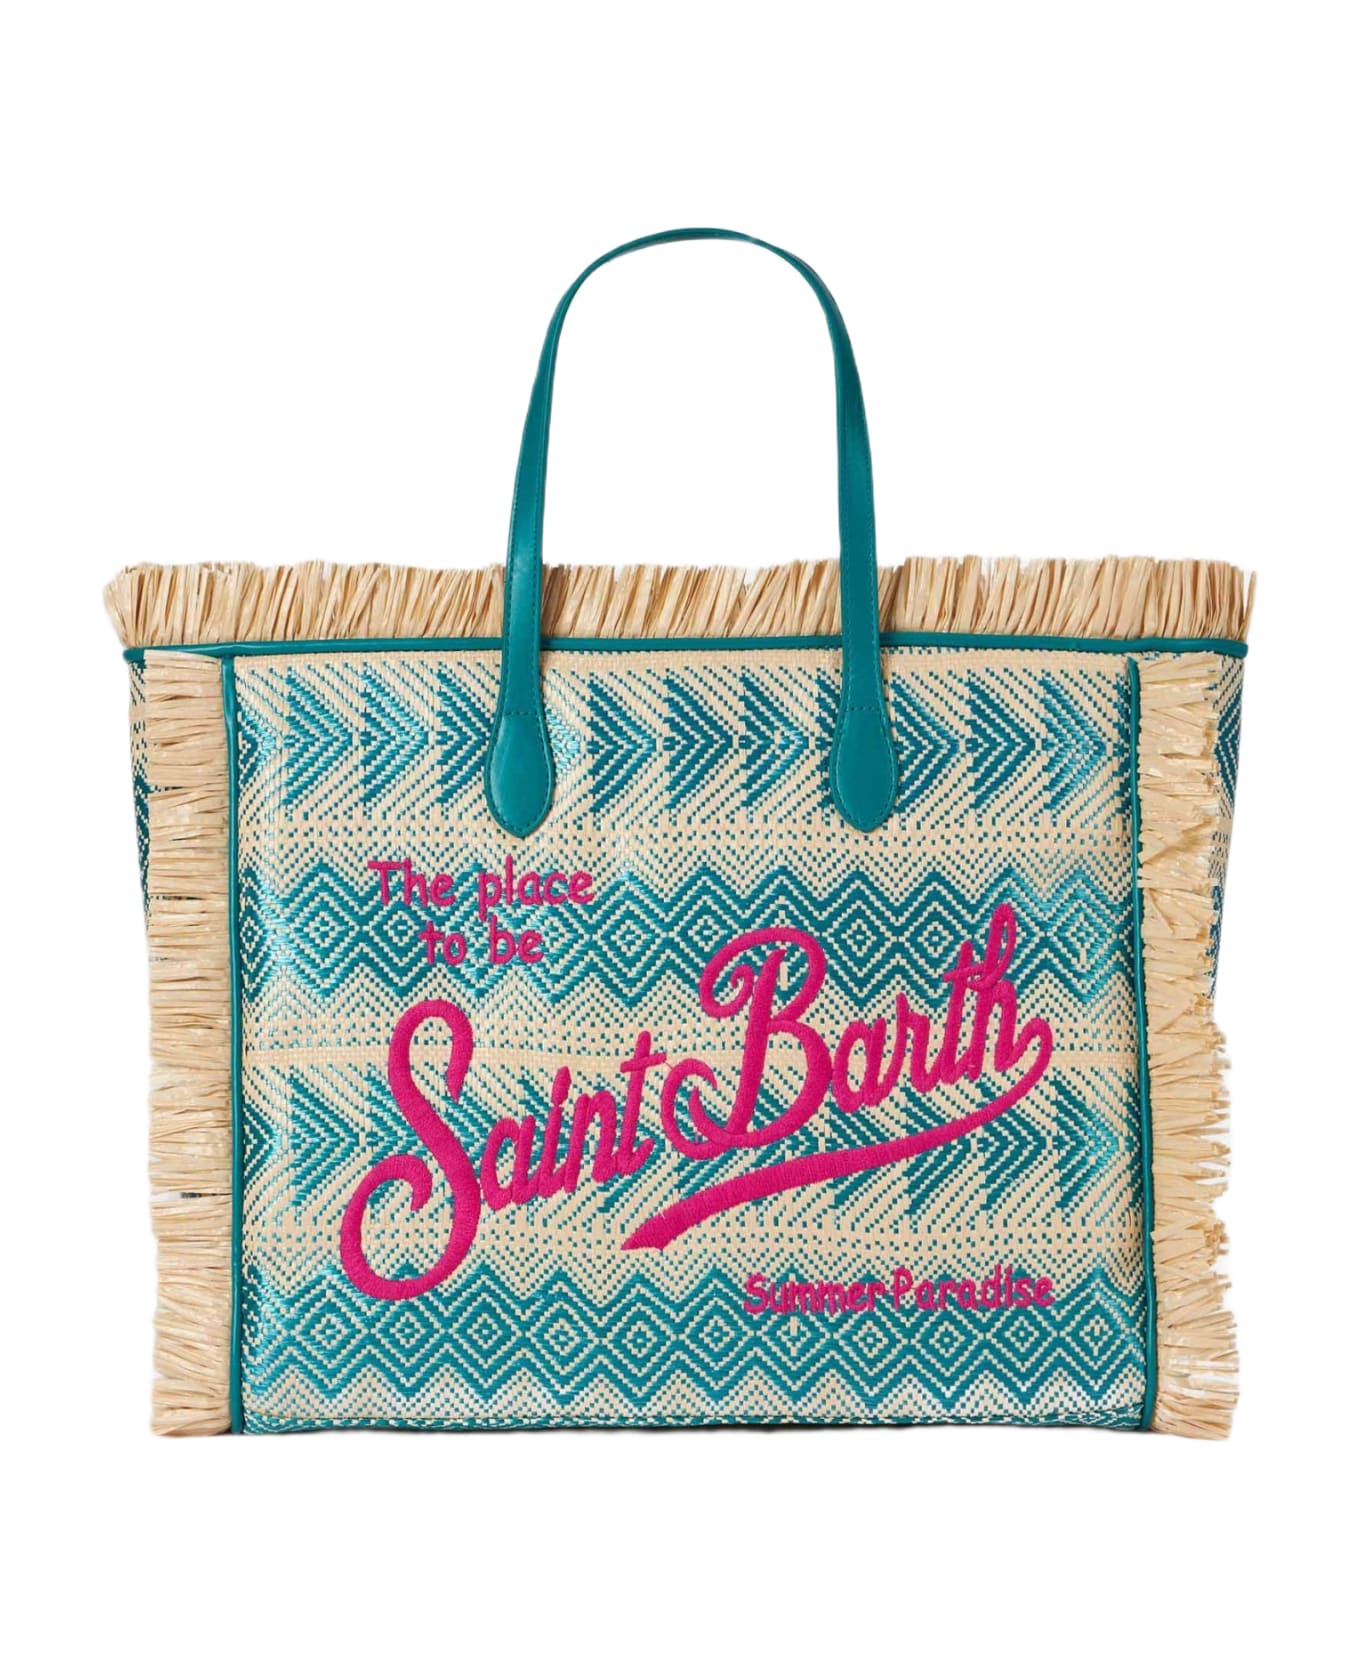 MC2 Saint Barth Vanity Straw Bag With Embroidery And Geometric Pattern - SKY